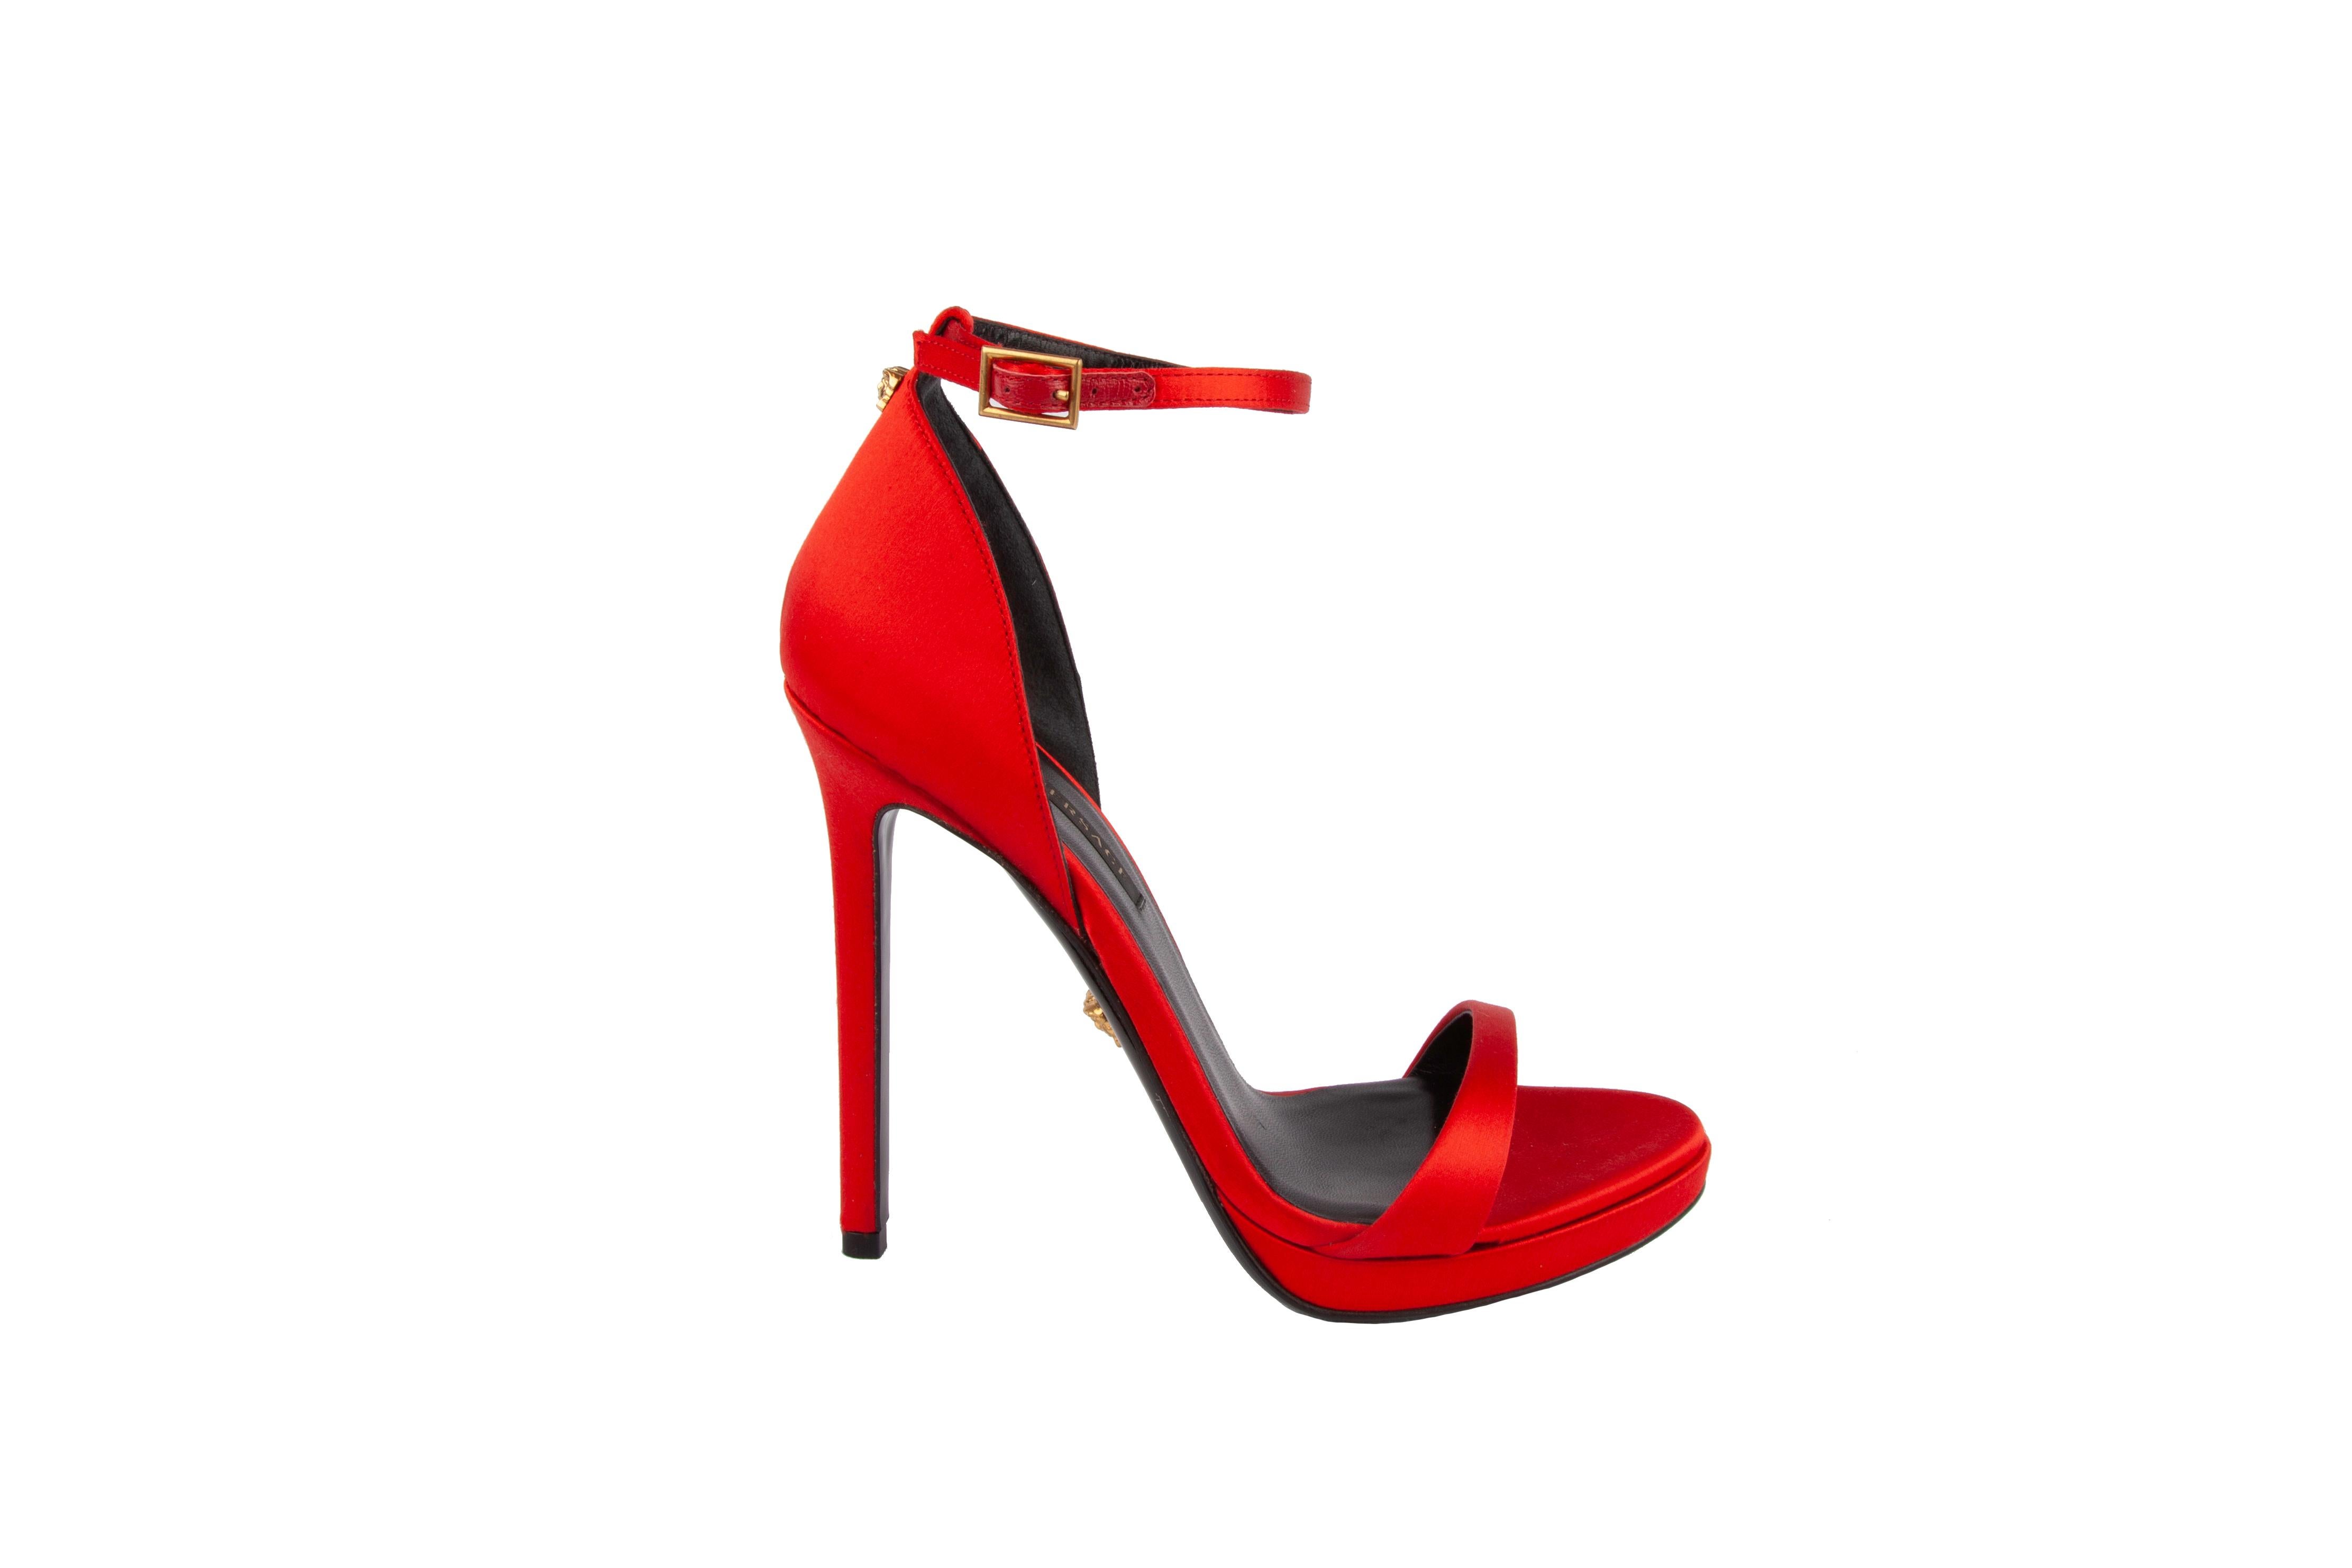 These Versace heels feature a luxurious red satin material, delicate straps, and gold tone hardware. They are a timeless, classic item that your closet needs. Brand new. Made in Italy.

Size: 38 (IT)

Material: Satin & Leather